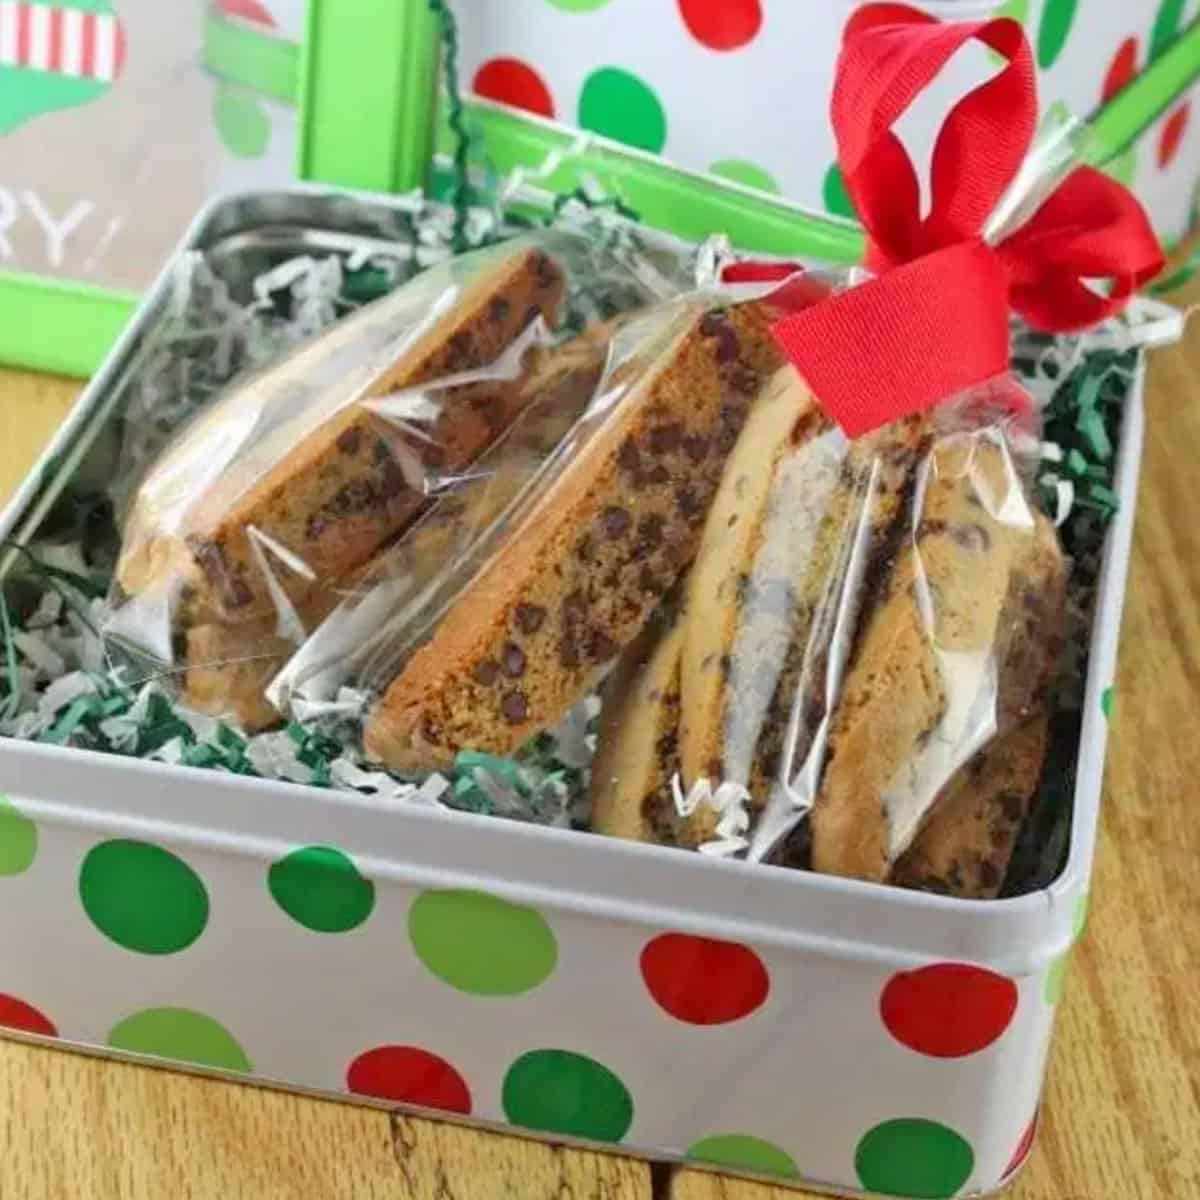 A holiday gift box full of chocolate chip biscotti.